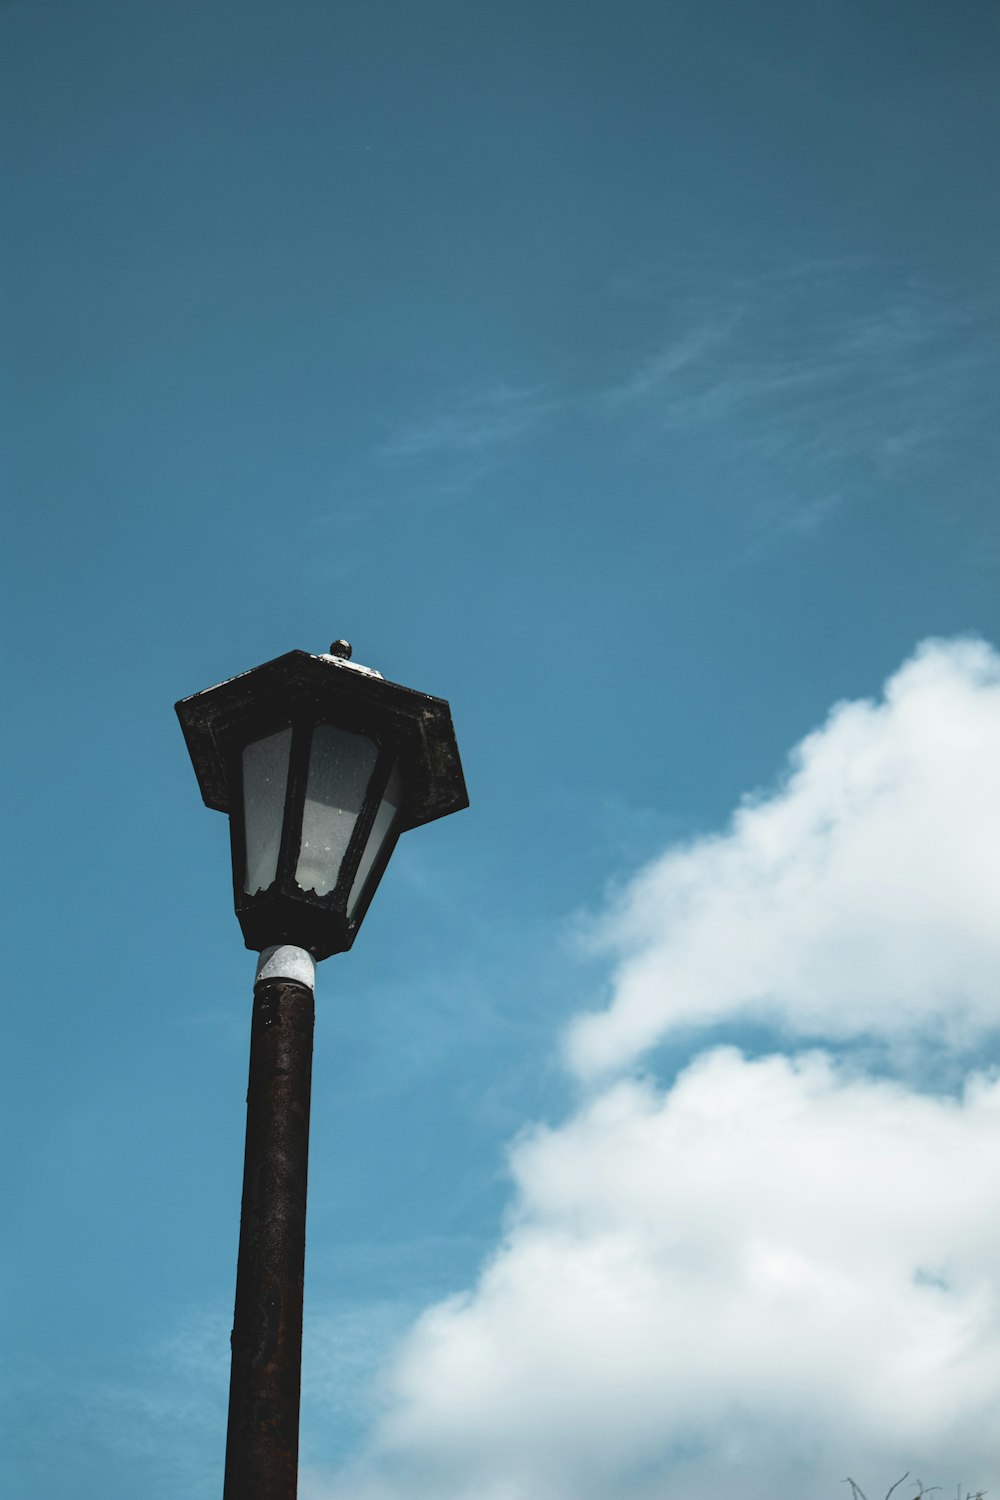 a lamp post with a bird on top of it